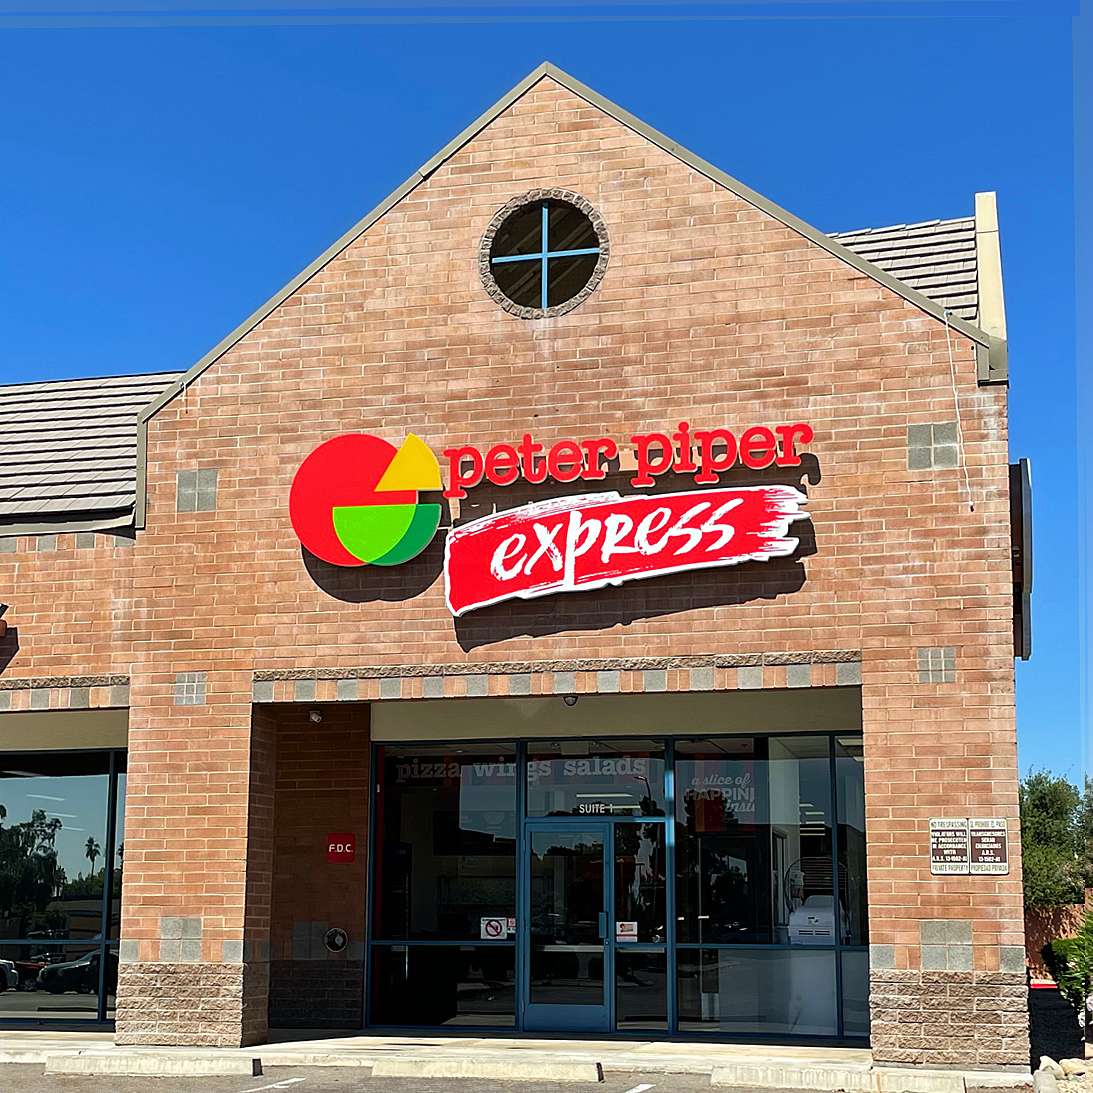 Peter Piper Pizza Express Greenway